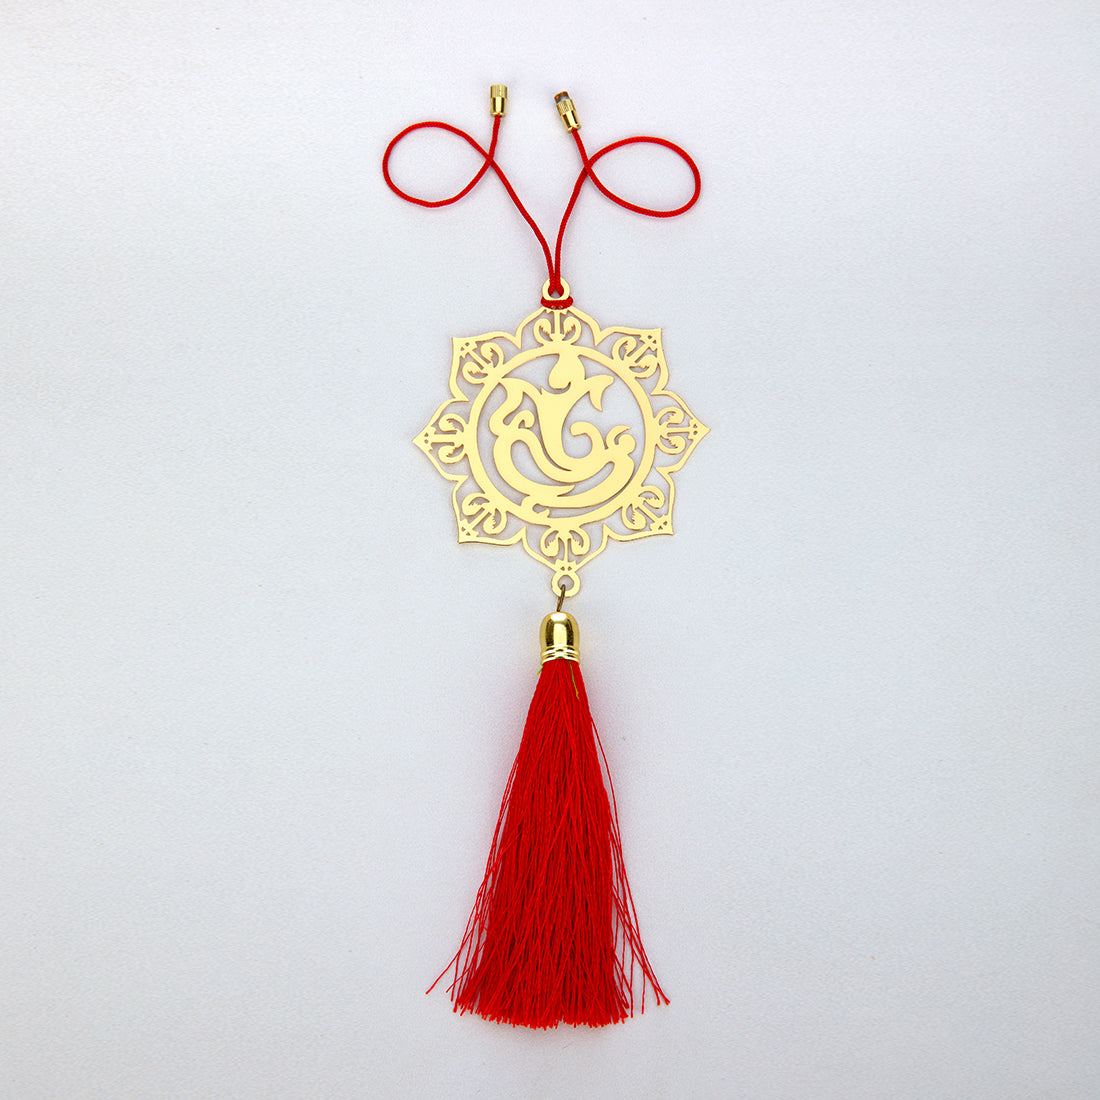 Ganesha Hanging Accessories for Car Rear View Mirror Decor in Brass